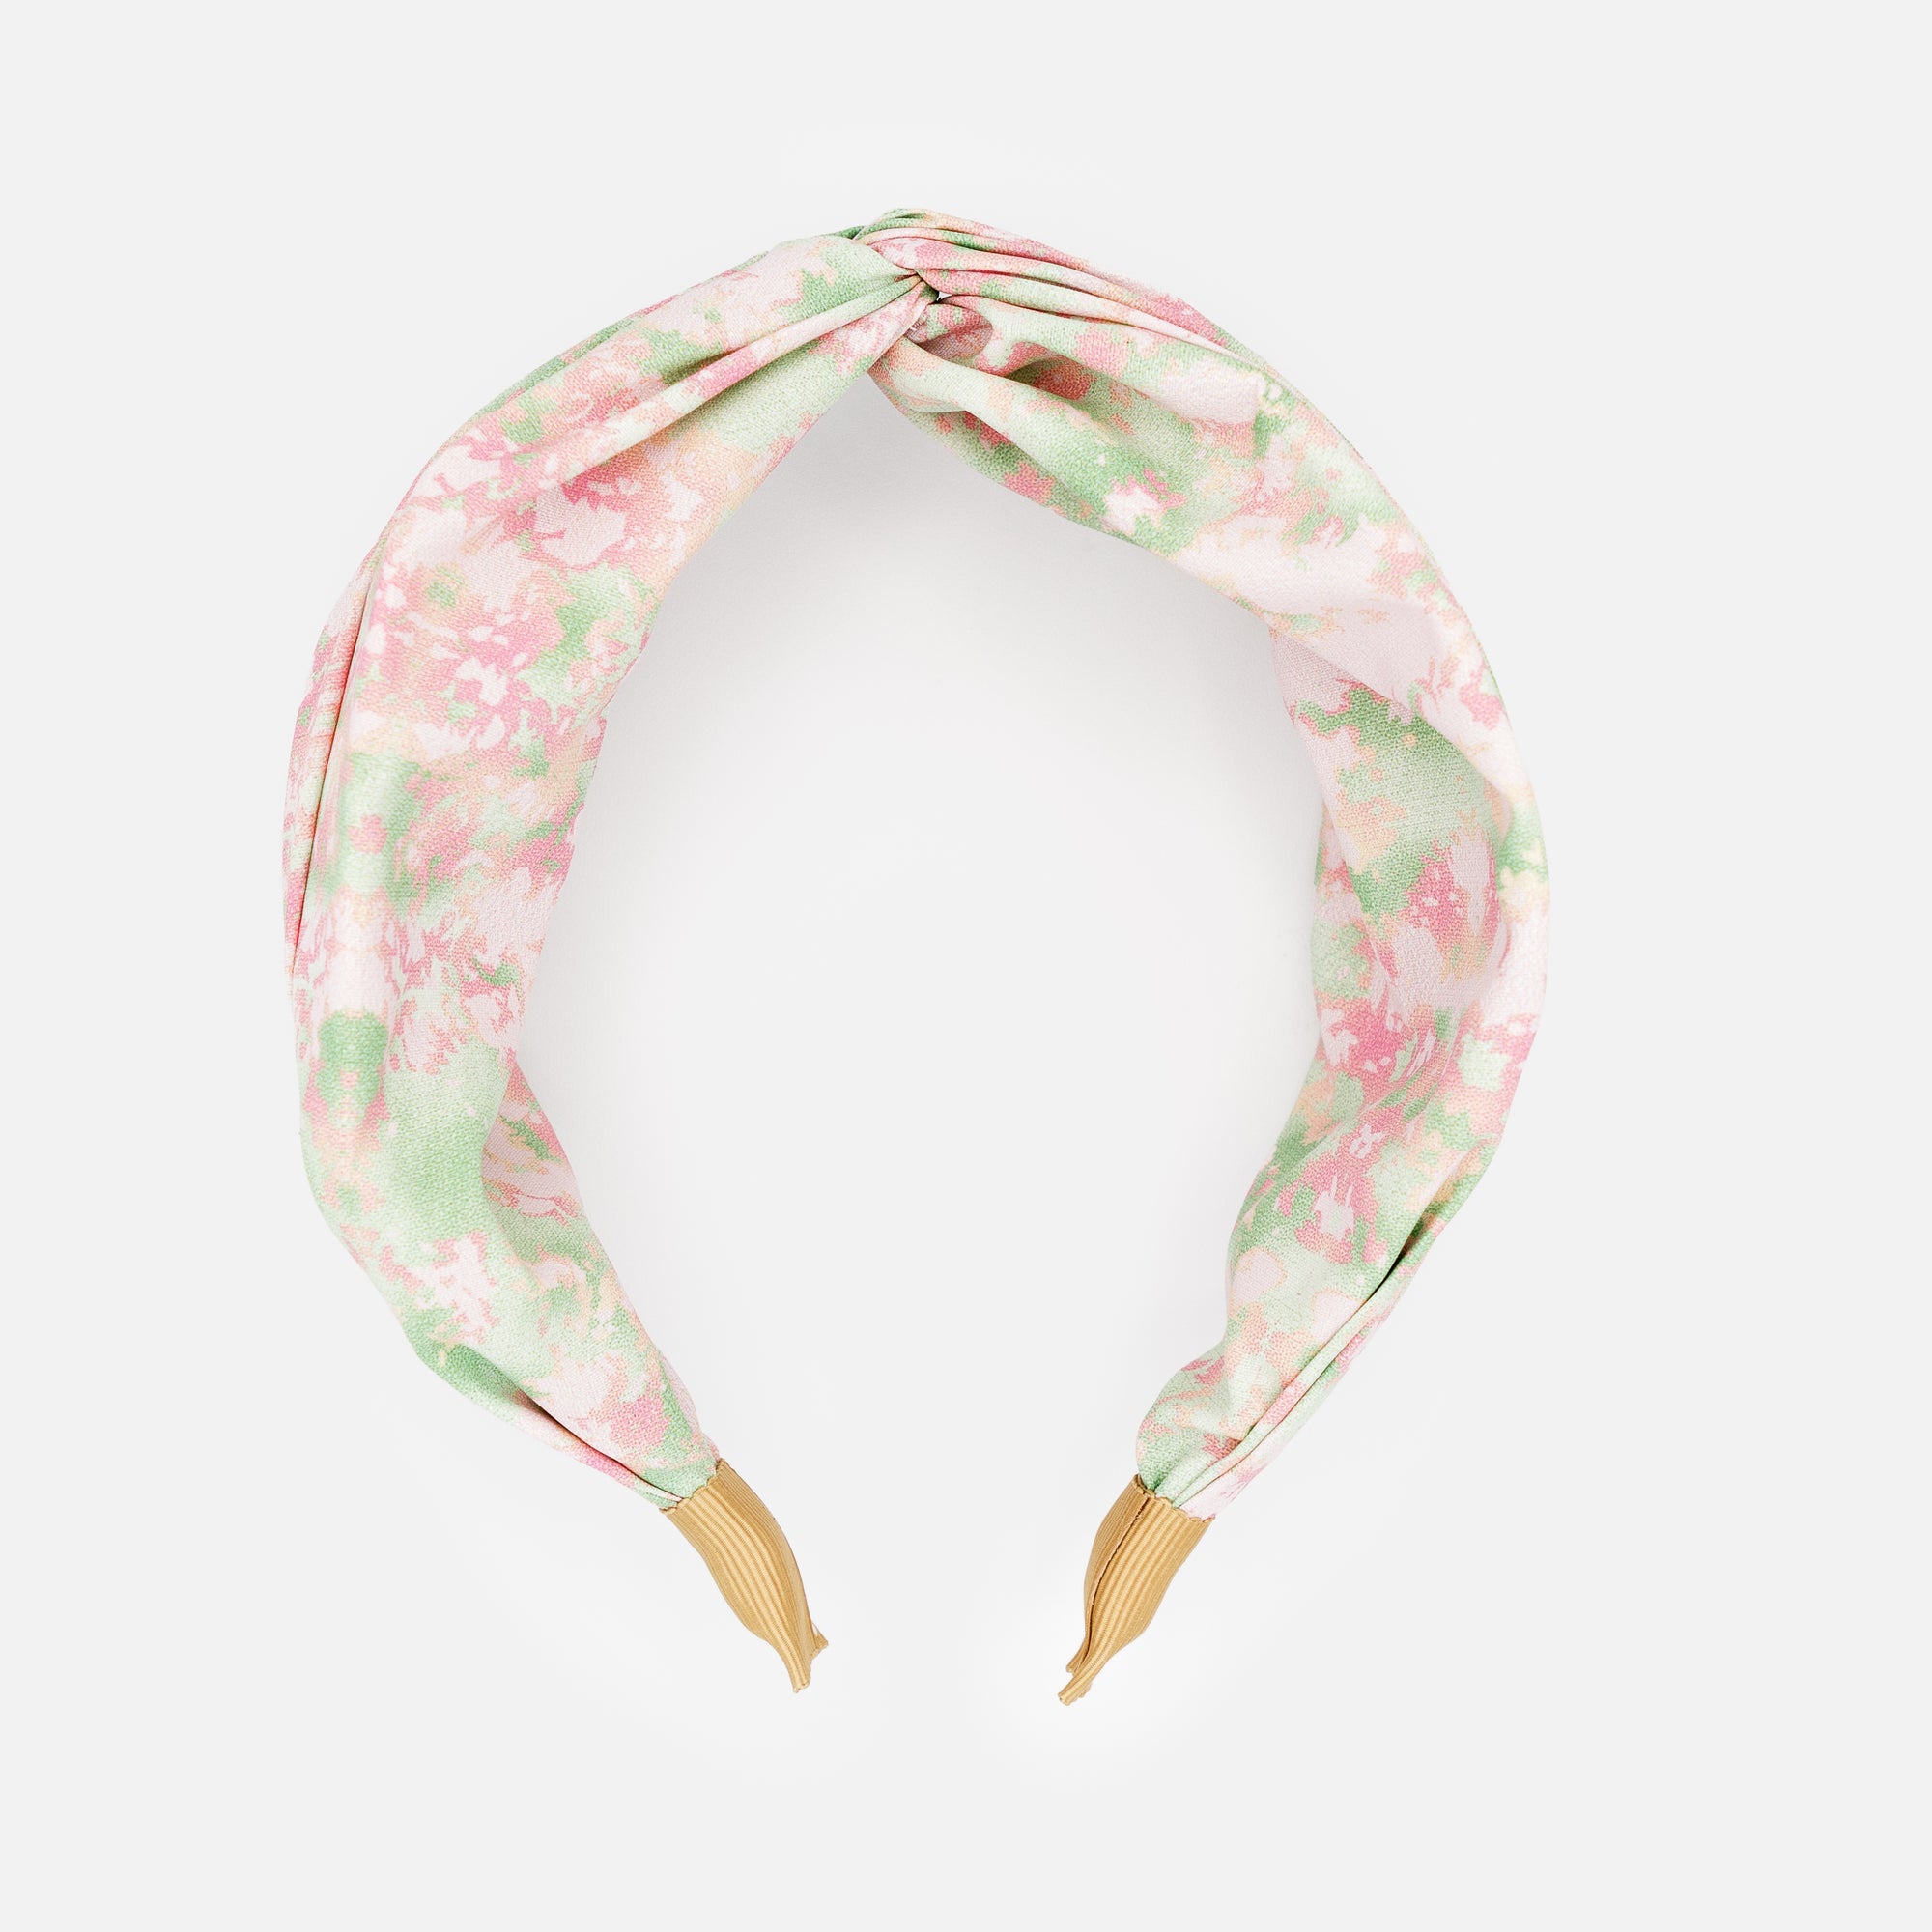 Pink and pale green headband with bow